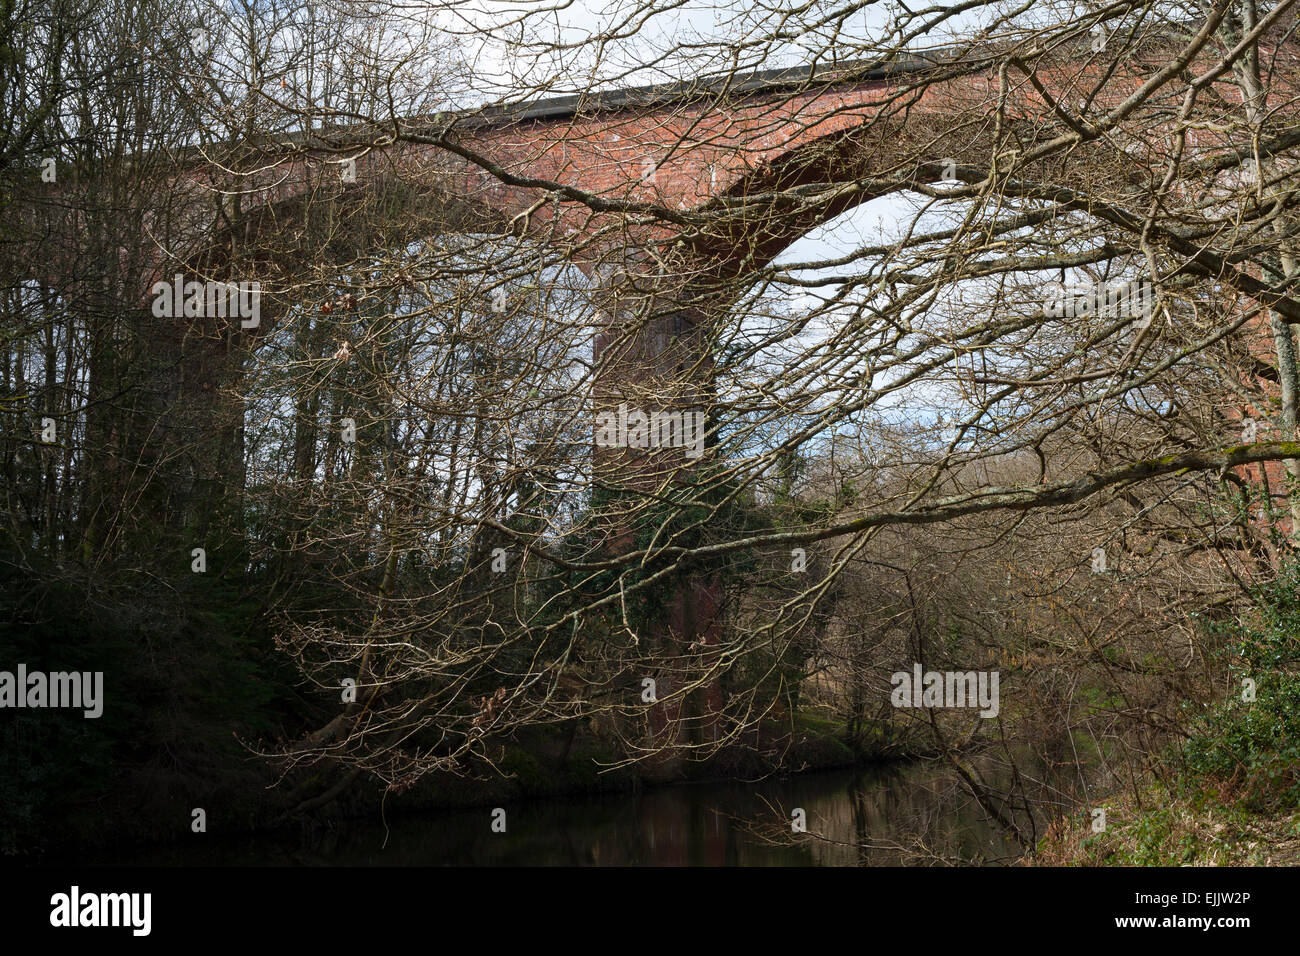 Viaduct as part of the Derwent Walk railway path and Coast to Coast route crossing the River Derwent next to Rowlands Gill. Stock Photo